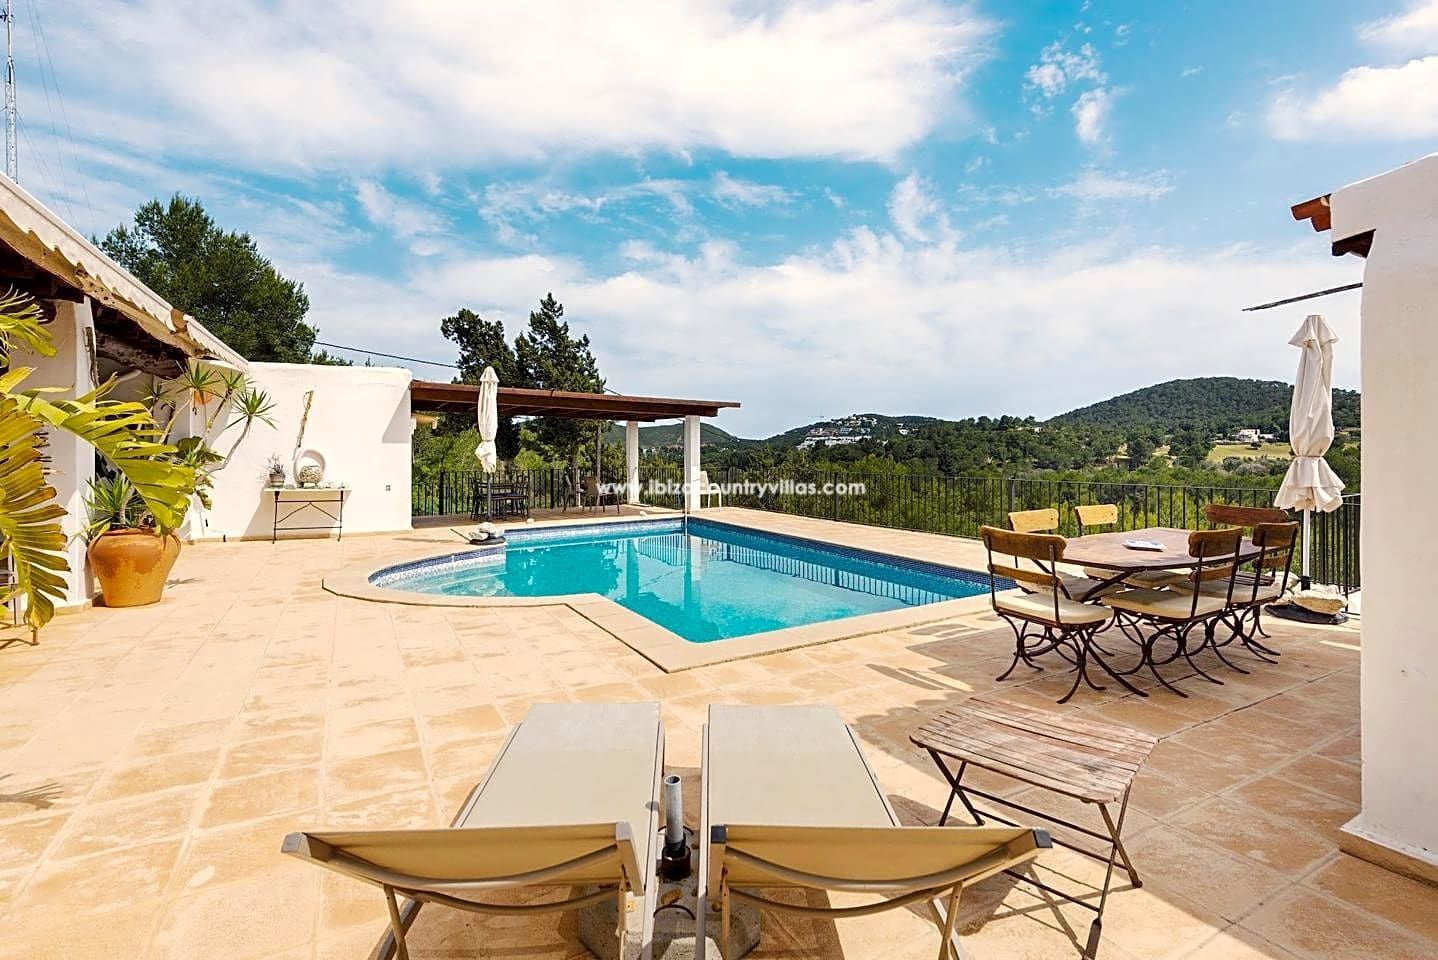 Spacious and bright Ibicencan style villa located with beautiful views